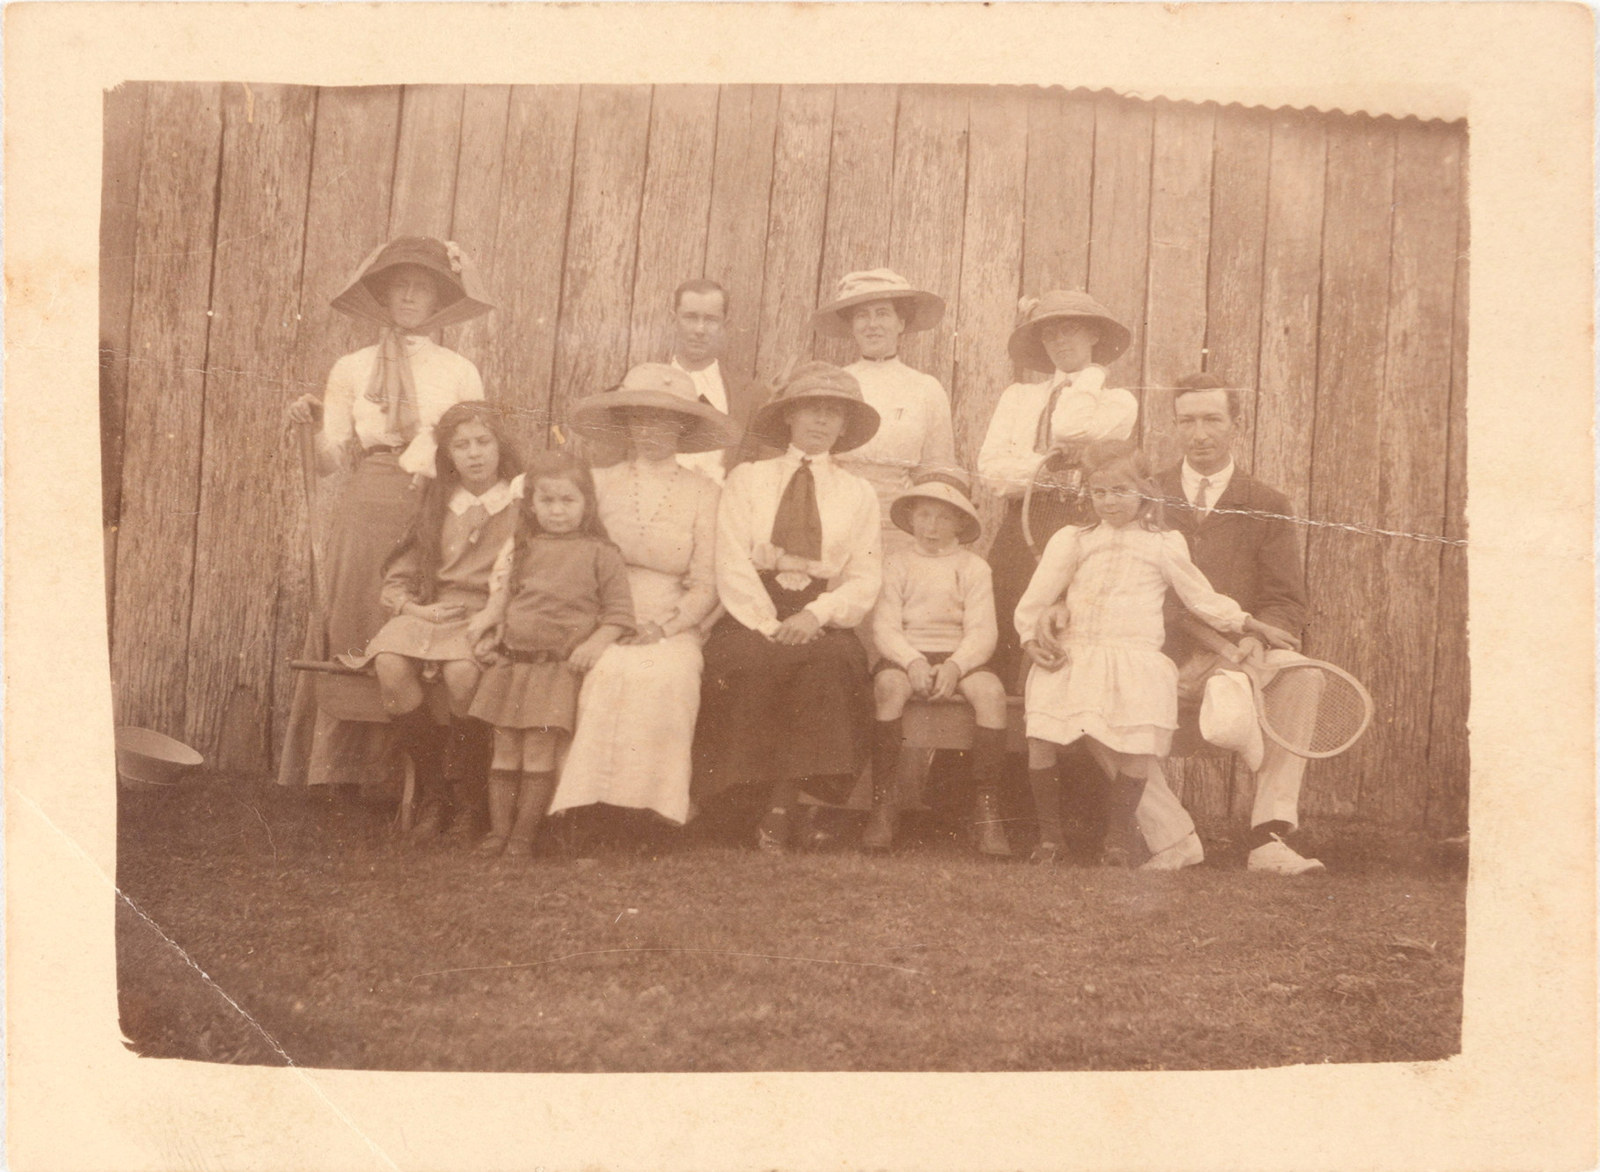 Photograph depicting a group outside the wool shed at Rouse Hill estate, including Norman M Pearce, Kathleen Buchanan Rouse and Mary Pearce, c.1910